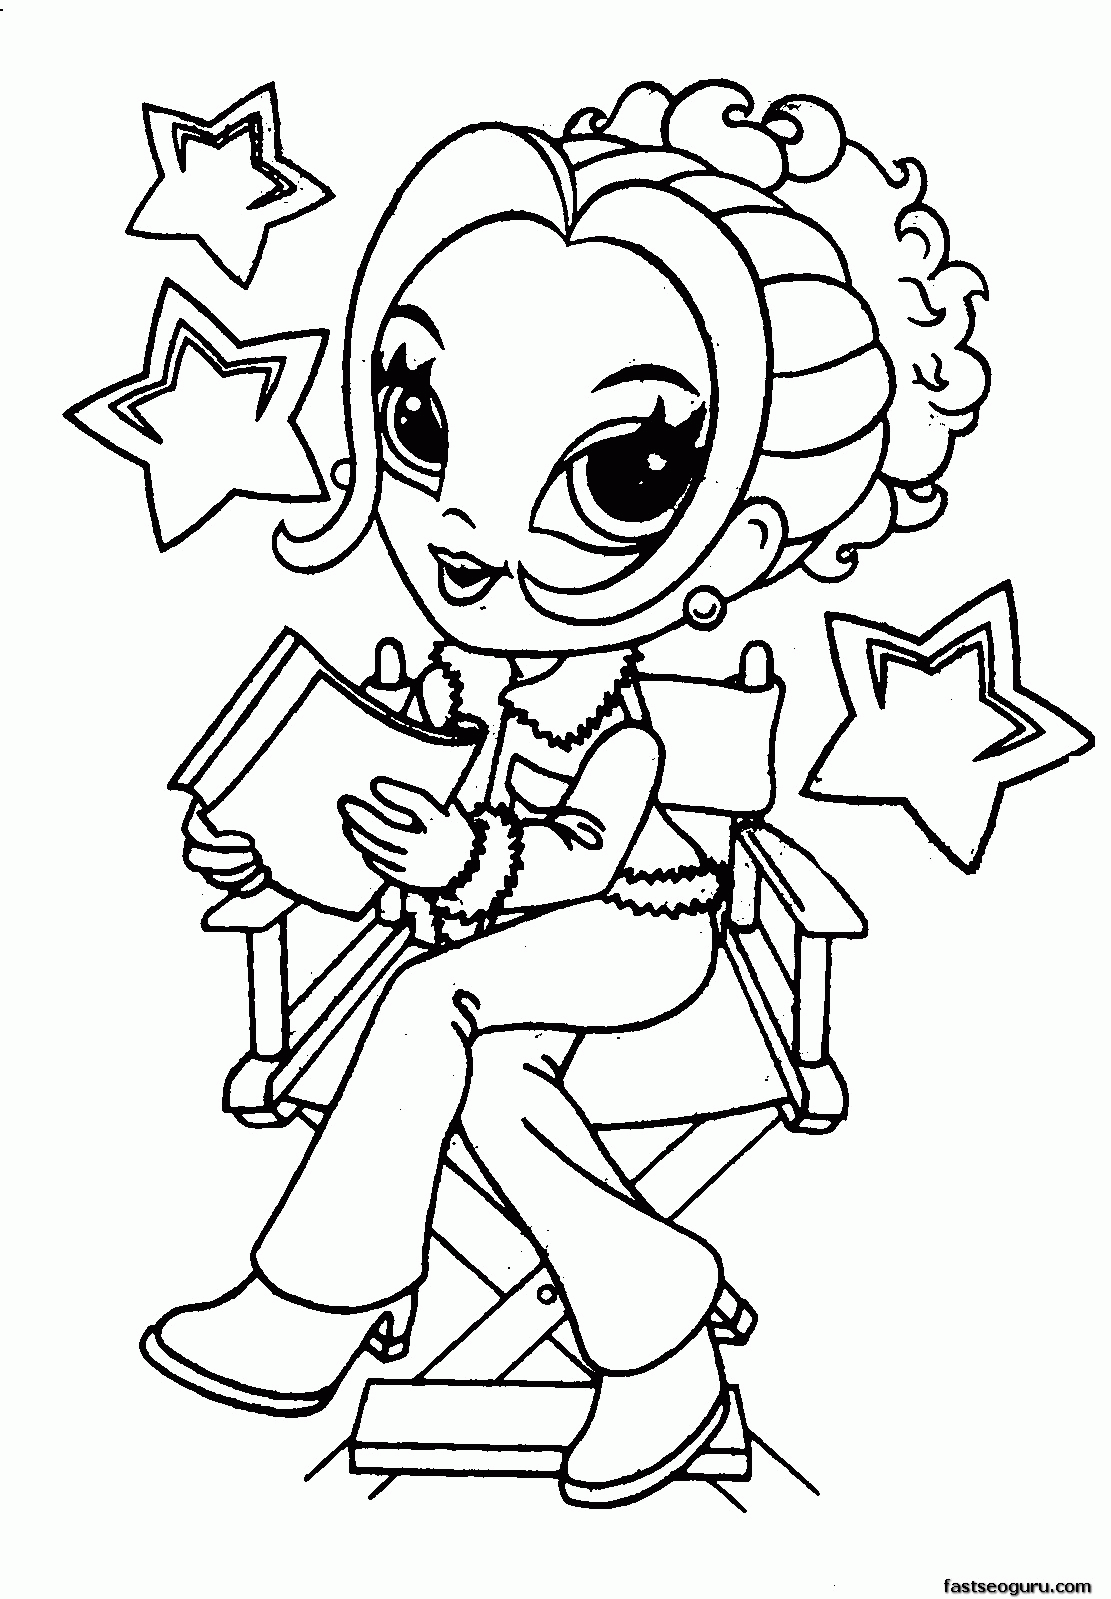 free girl coloring pages to print cute girl coloring pages to download and print for free coloring to print pages free girl 